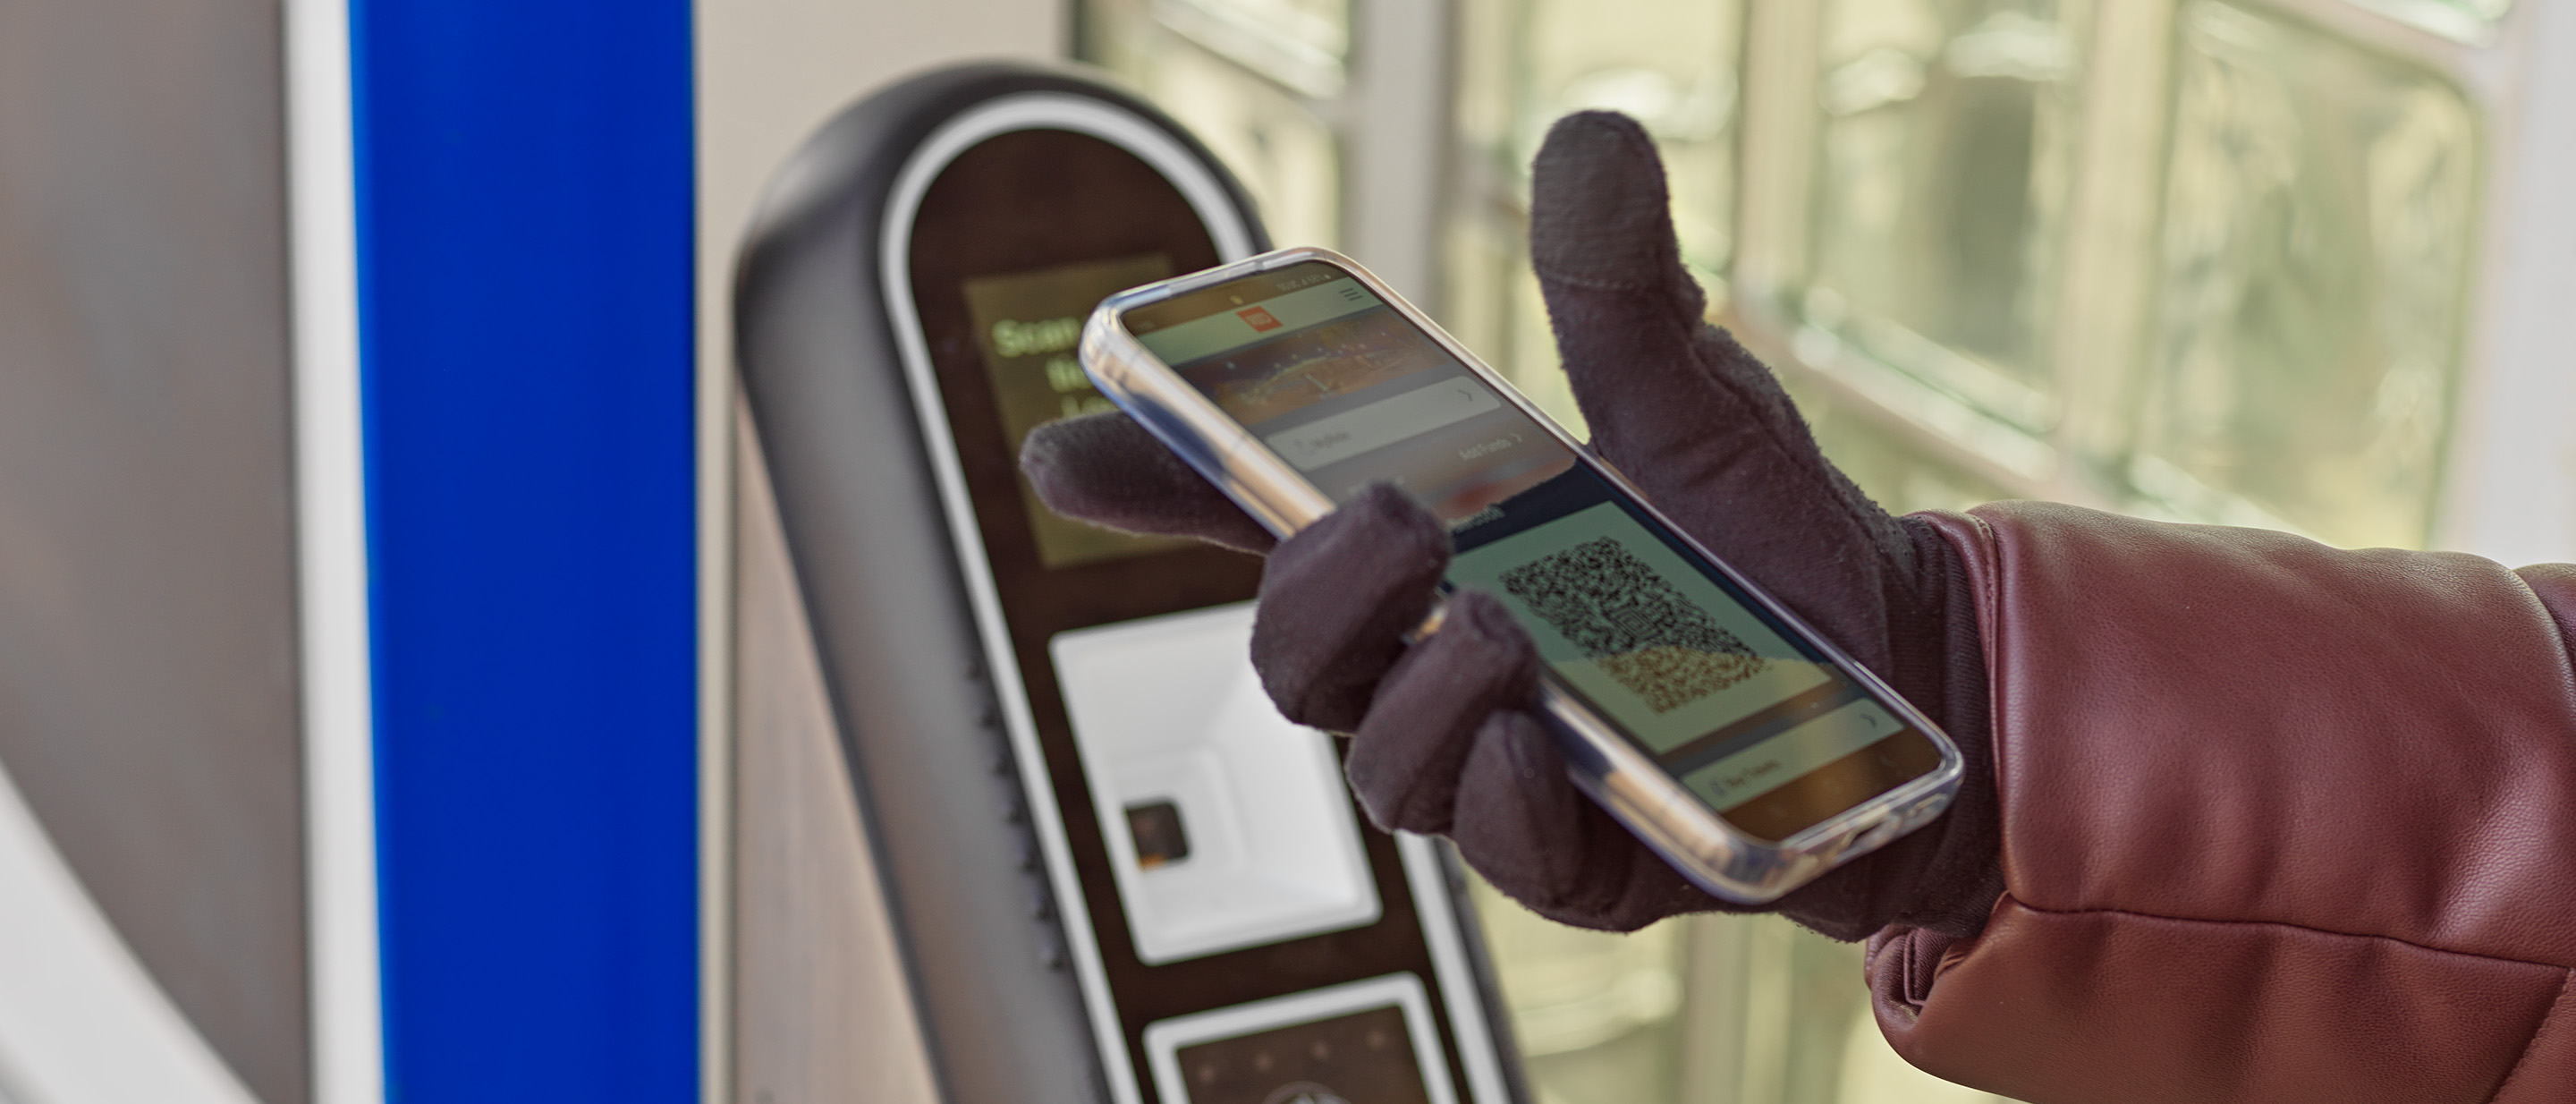 Photo of a customer scanning their MyRide barcode at a ticket validator